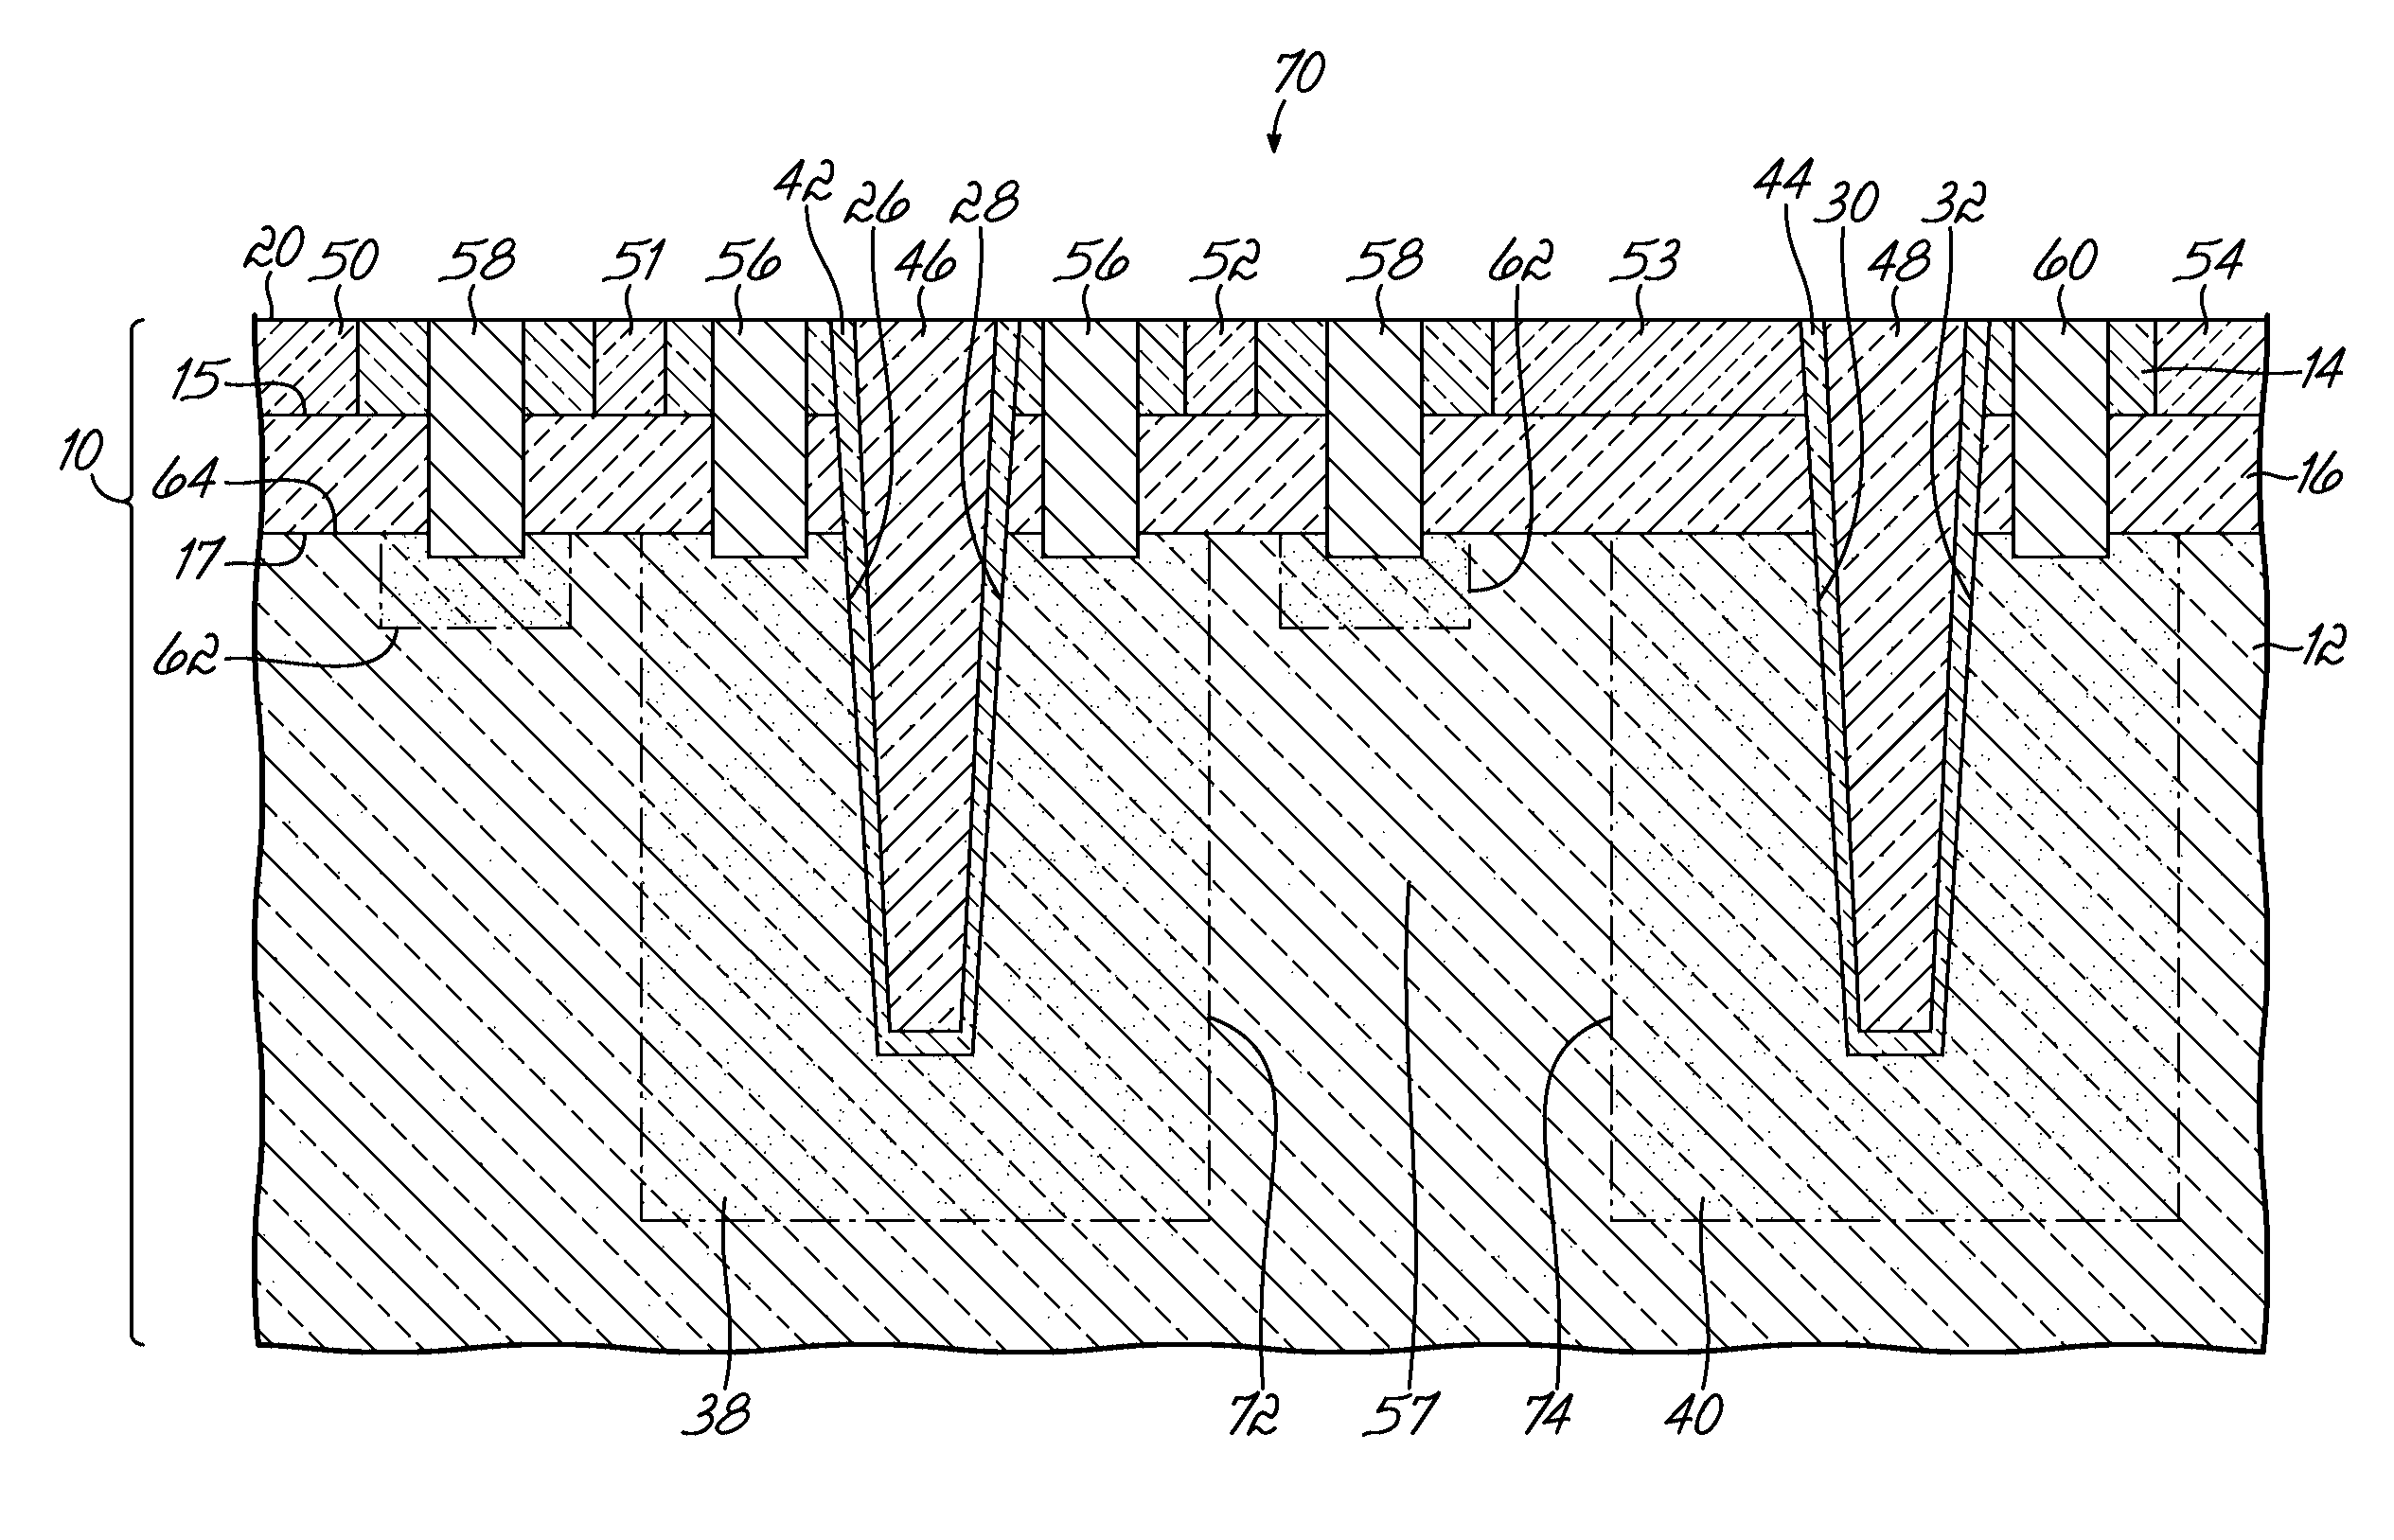 Trench generated device structures and design structures for radiofrequency and BiCMOS integrated circuits